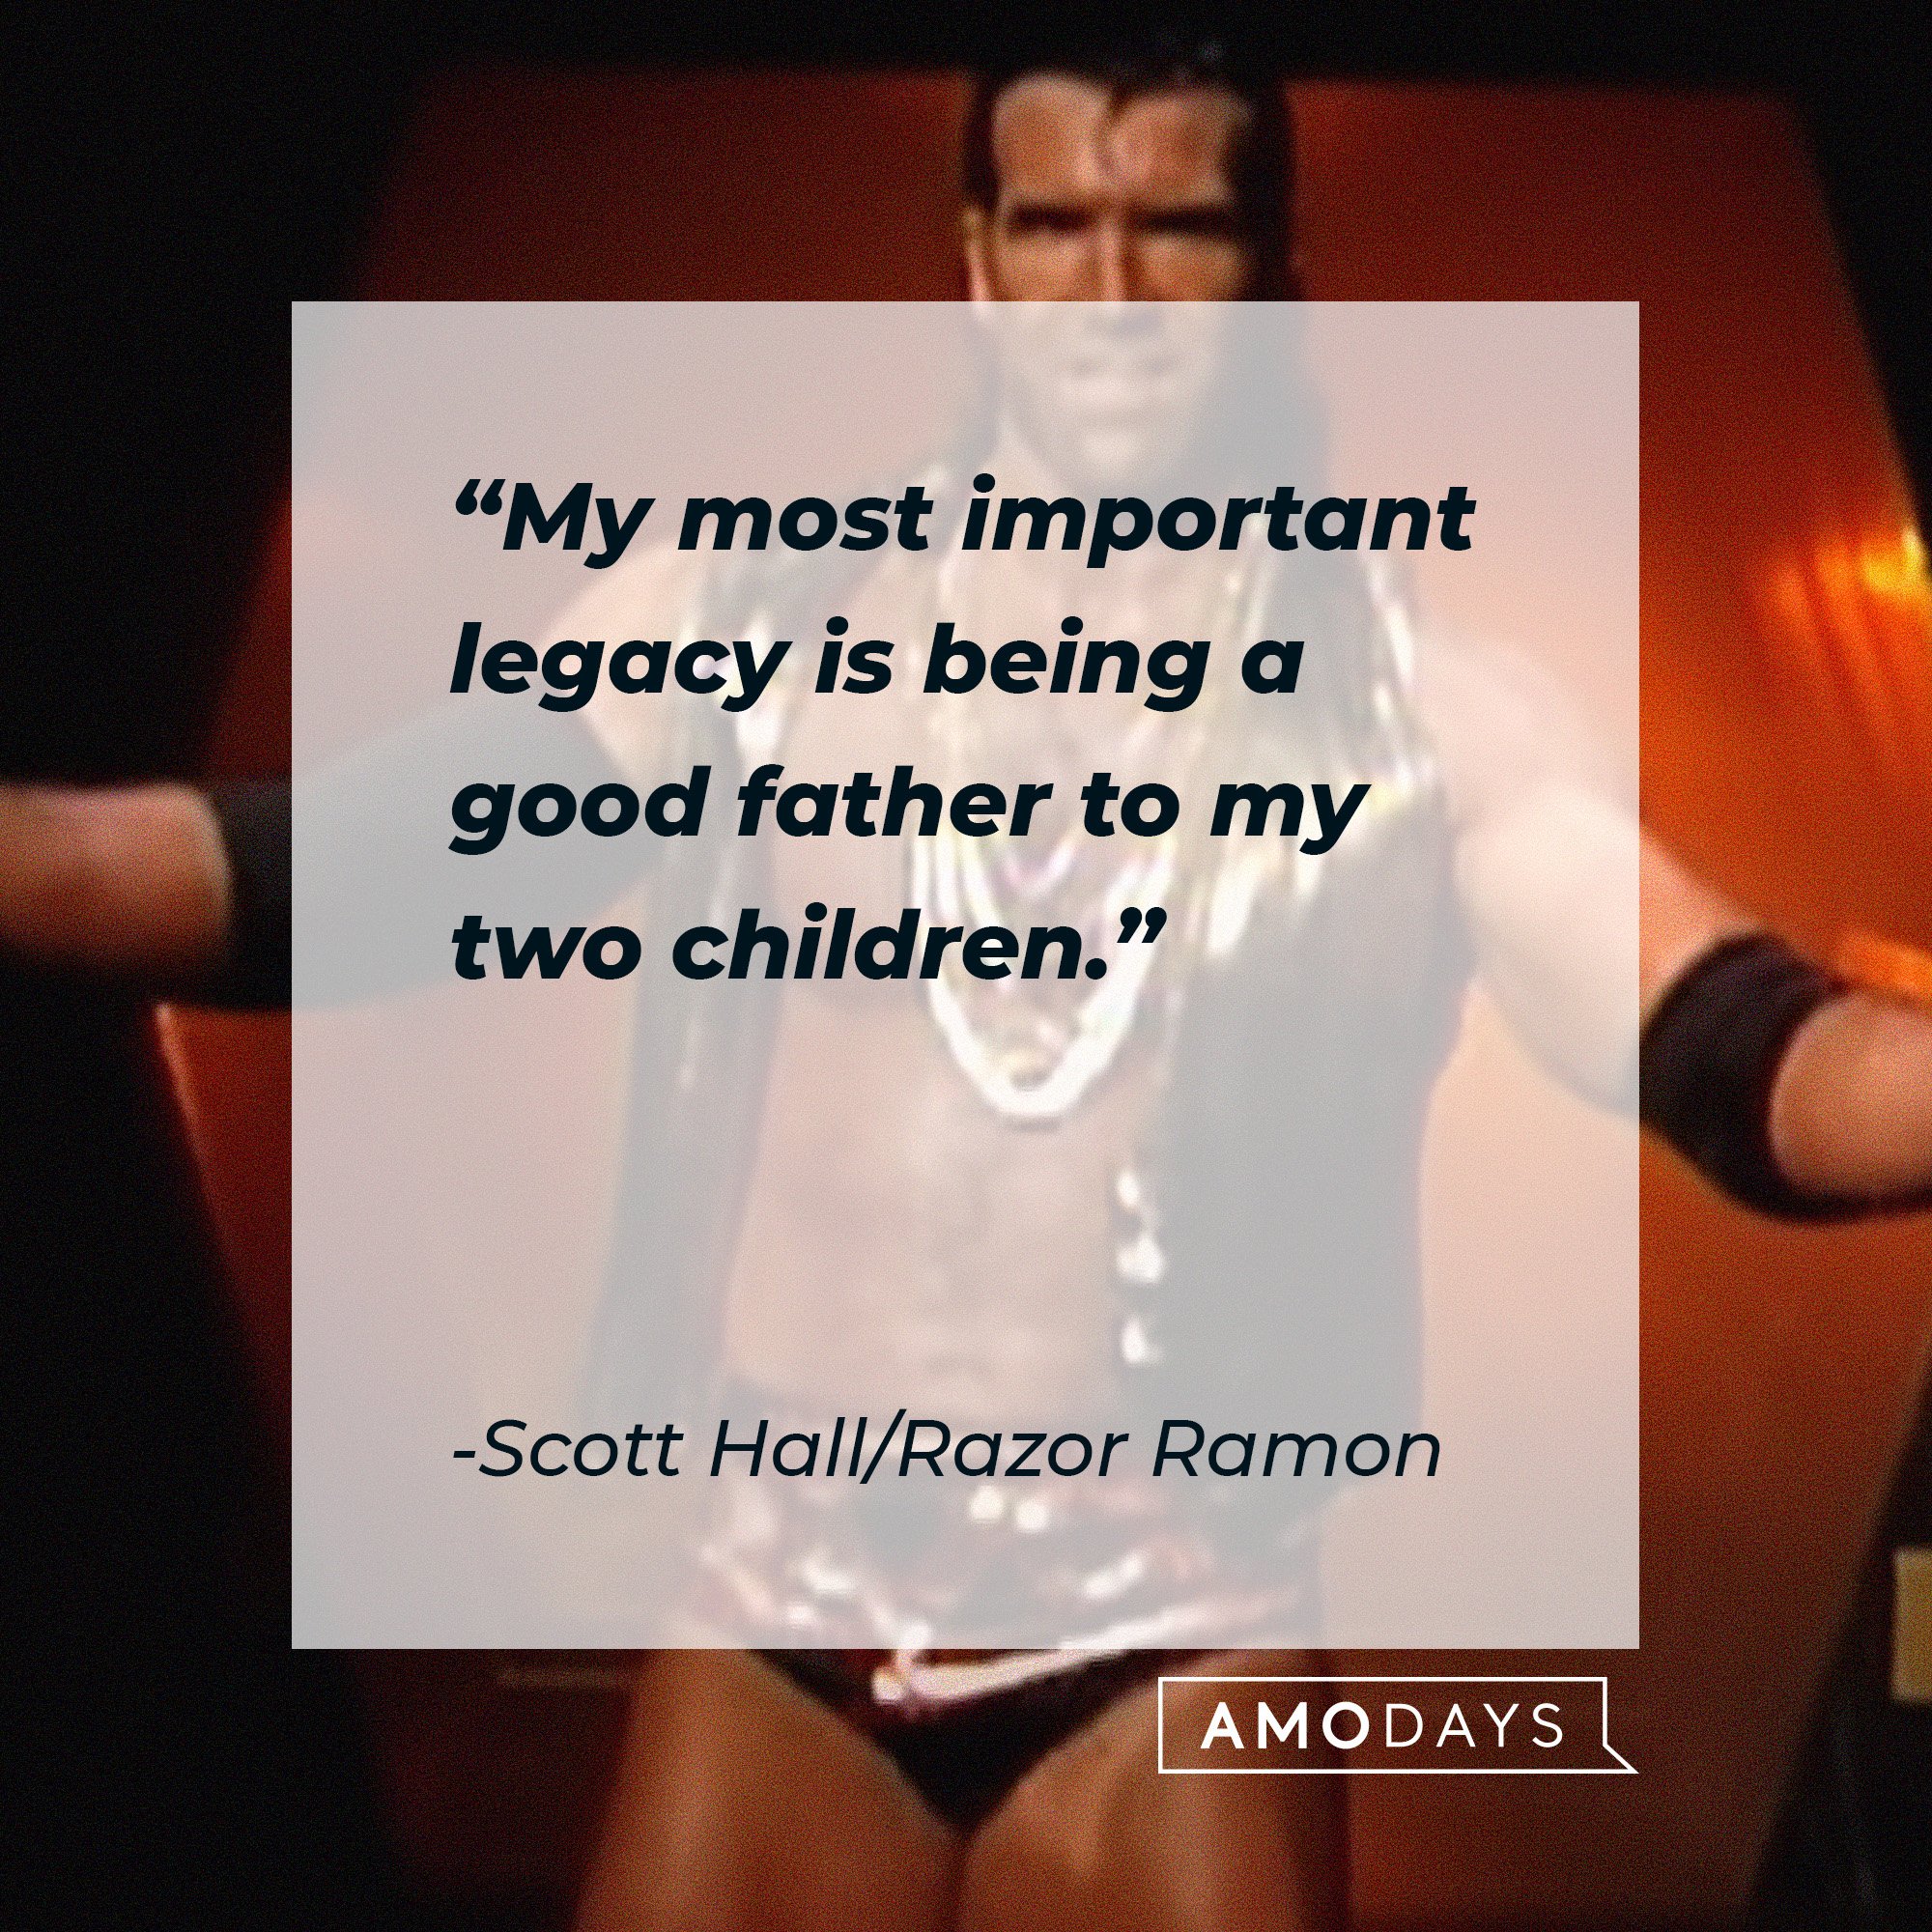 Scott Hall/Razor Ramon’s quote: "My most important legacy is being a good father to my two children." | Image: AmoDays